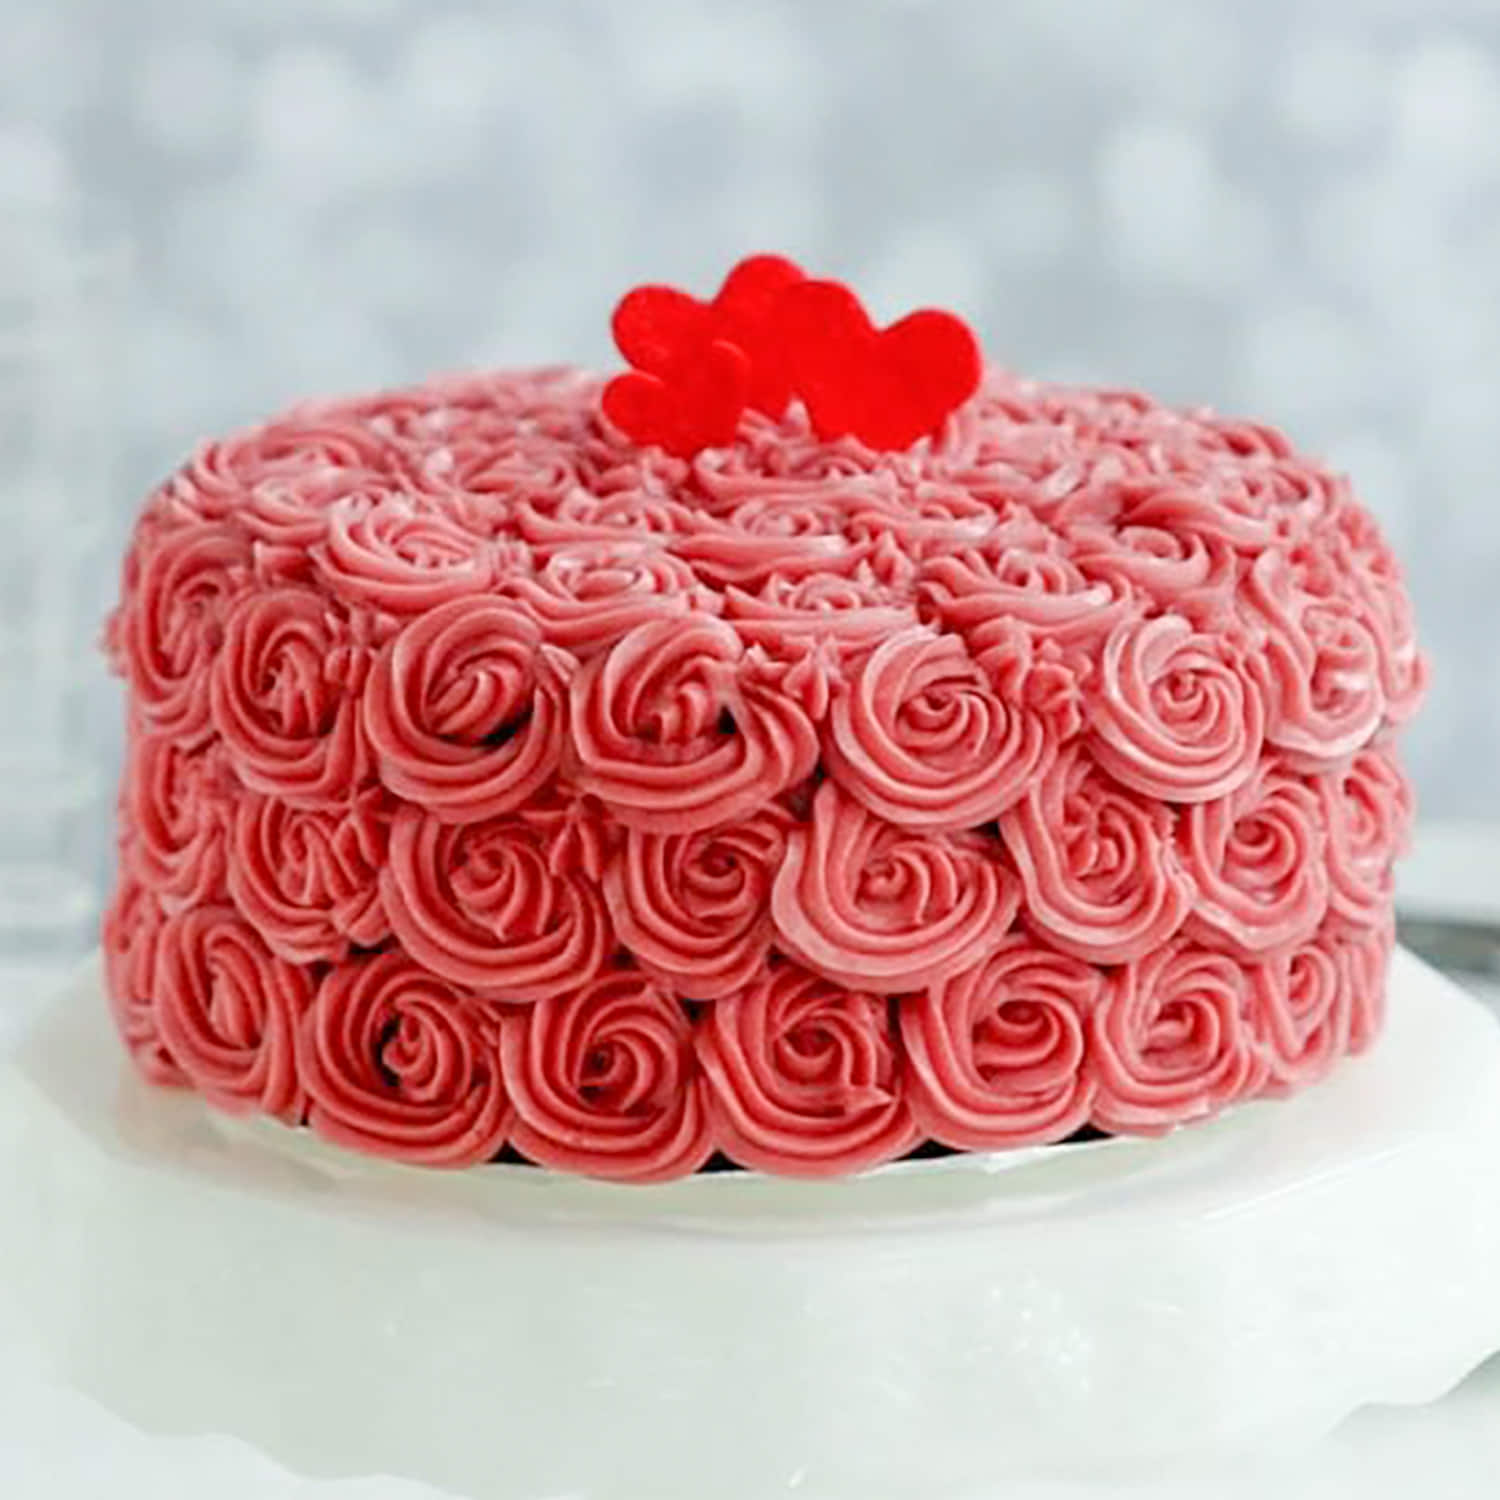 Gurgaon Special: Chocolate Birthday Rose Cake Delivery in Gurgaon @ ₹949.00